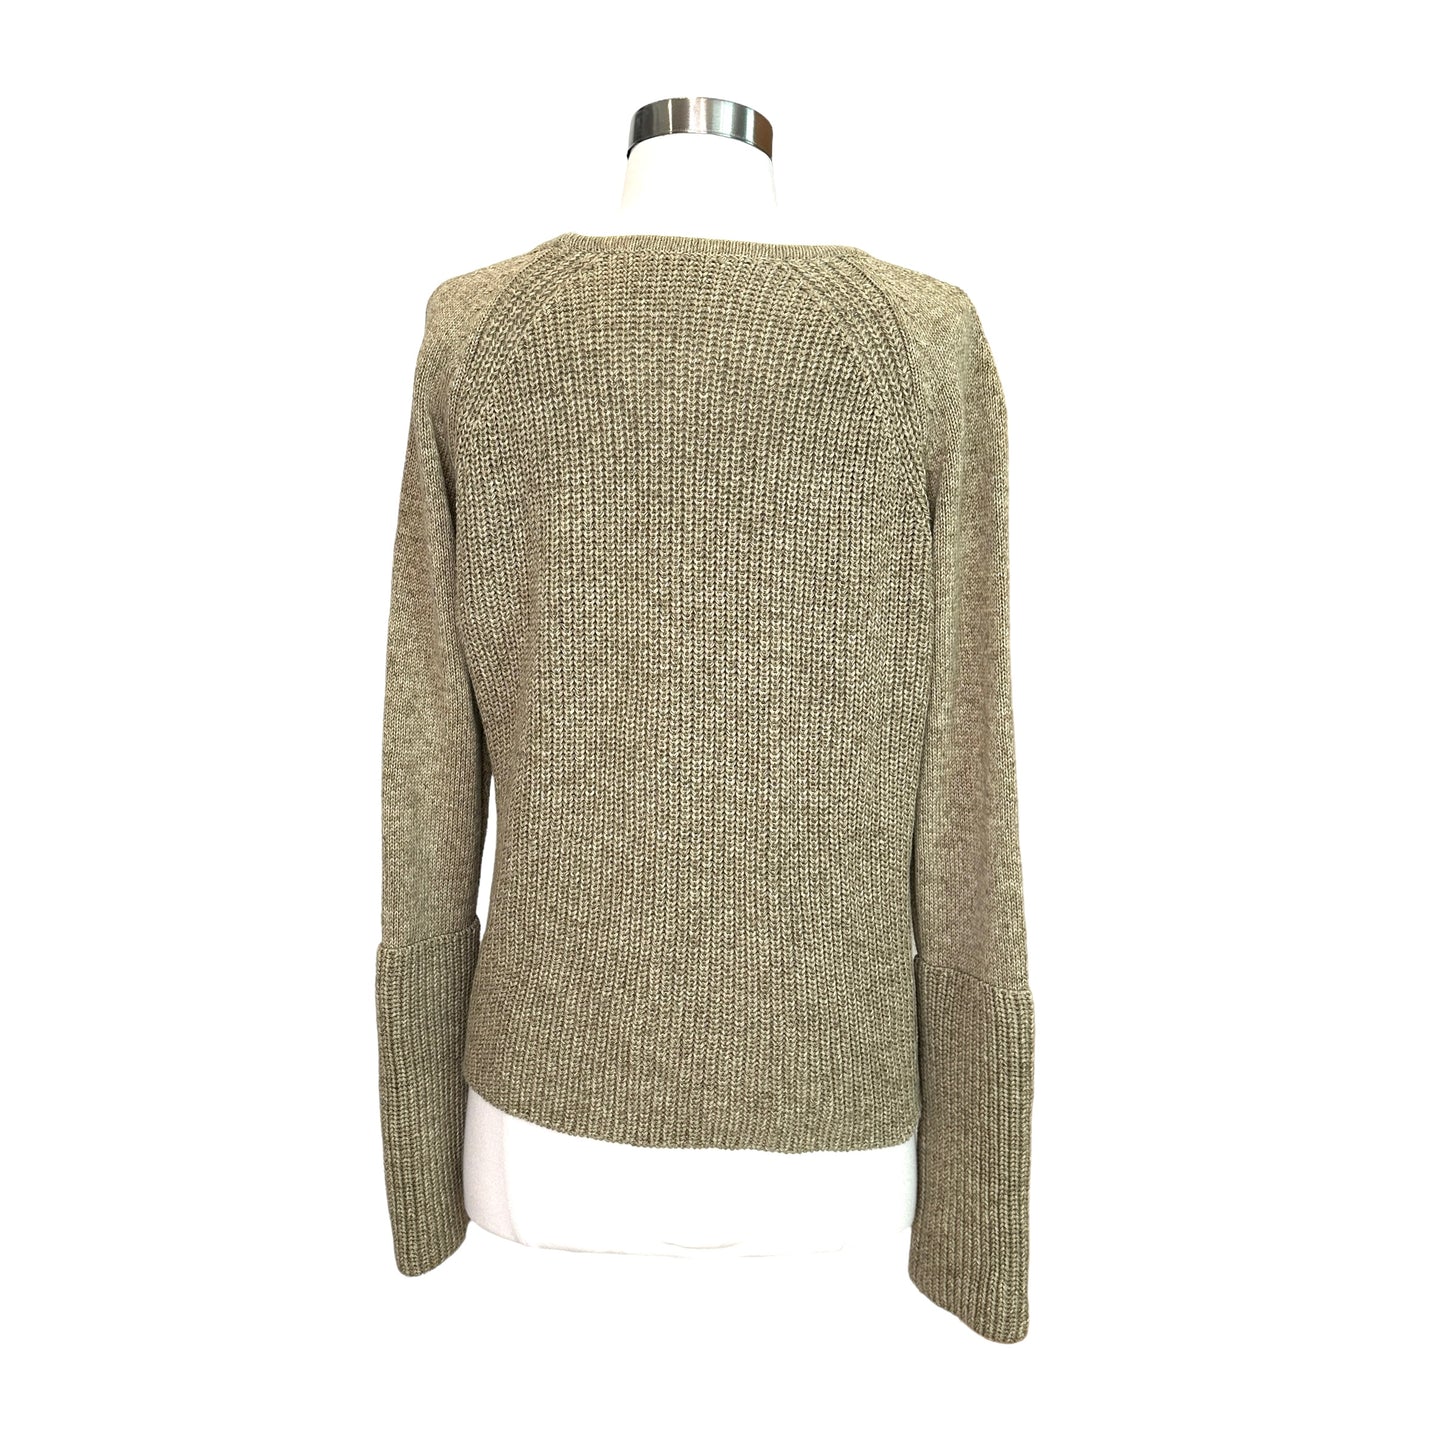 Green Knit Sweater - S